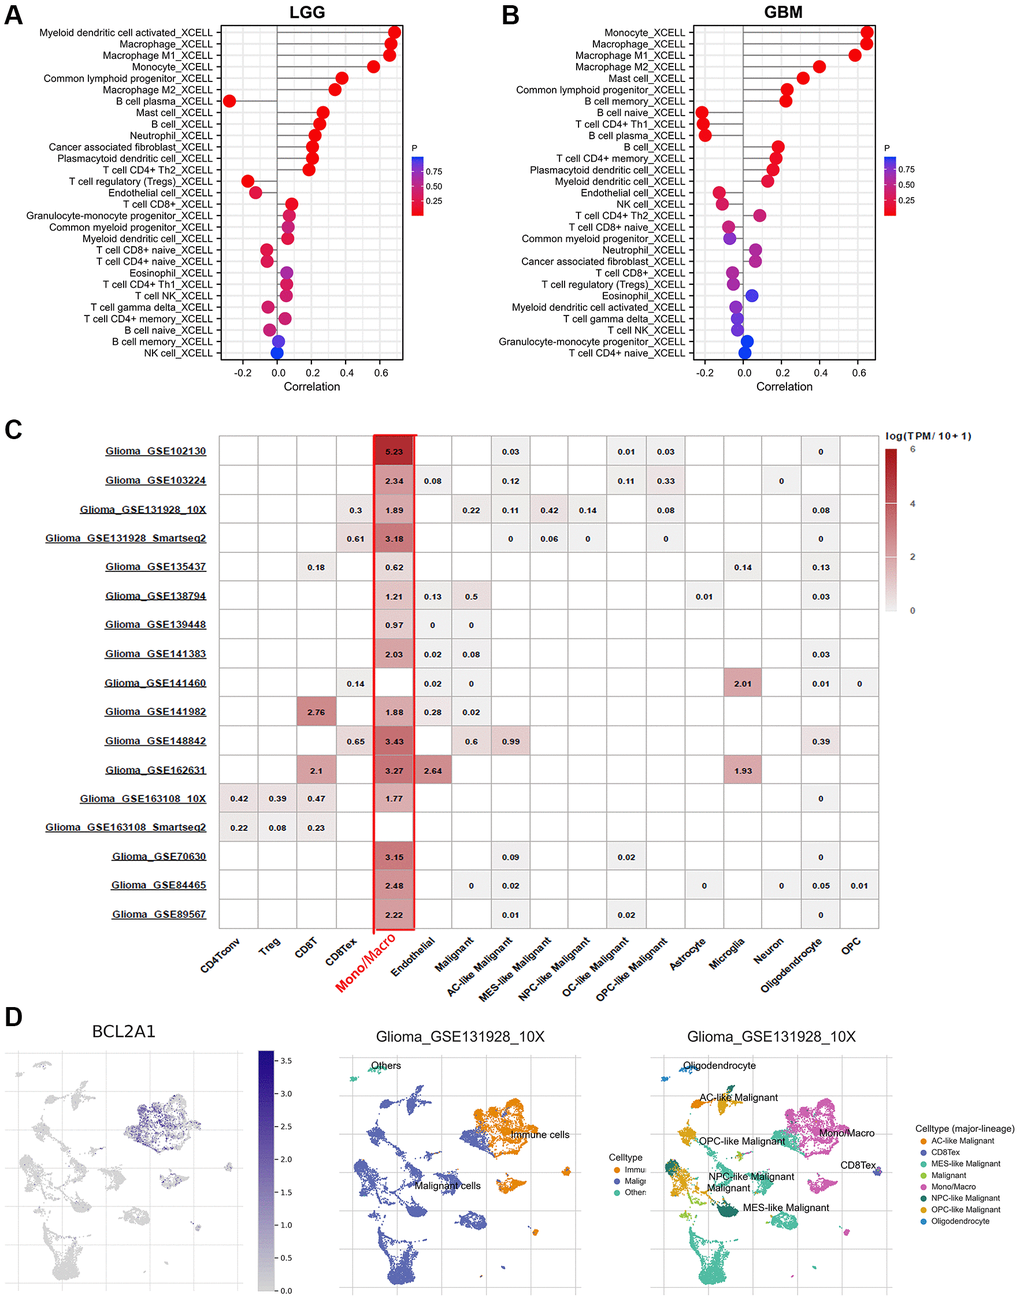 BCL2A1 was associated with macrophages and monocytes in gliomas. (A) Correlation between BCL2A1 expression and 29 infiltrating immune cells in LGG based on the TIMER 2.0 database. (B) Correlation between BCL2A1 expression and 29 infiltrating immune cells in GBM based on the TIMER 2.0 database. (C) BCL2A1 expression in 17 glioma single-cell clusters. (D) UMAP plot showing BCL2A1 and cell type.